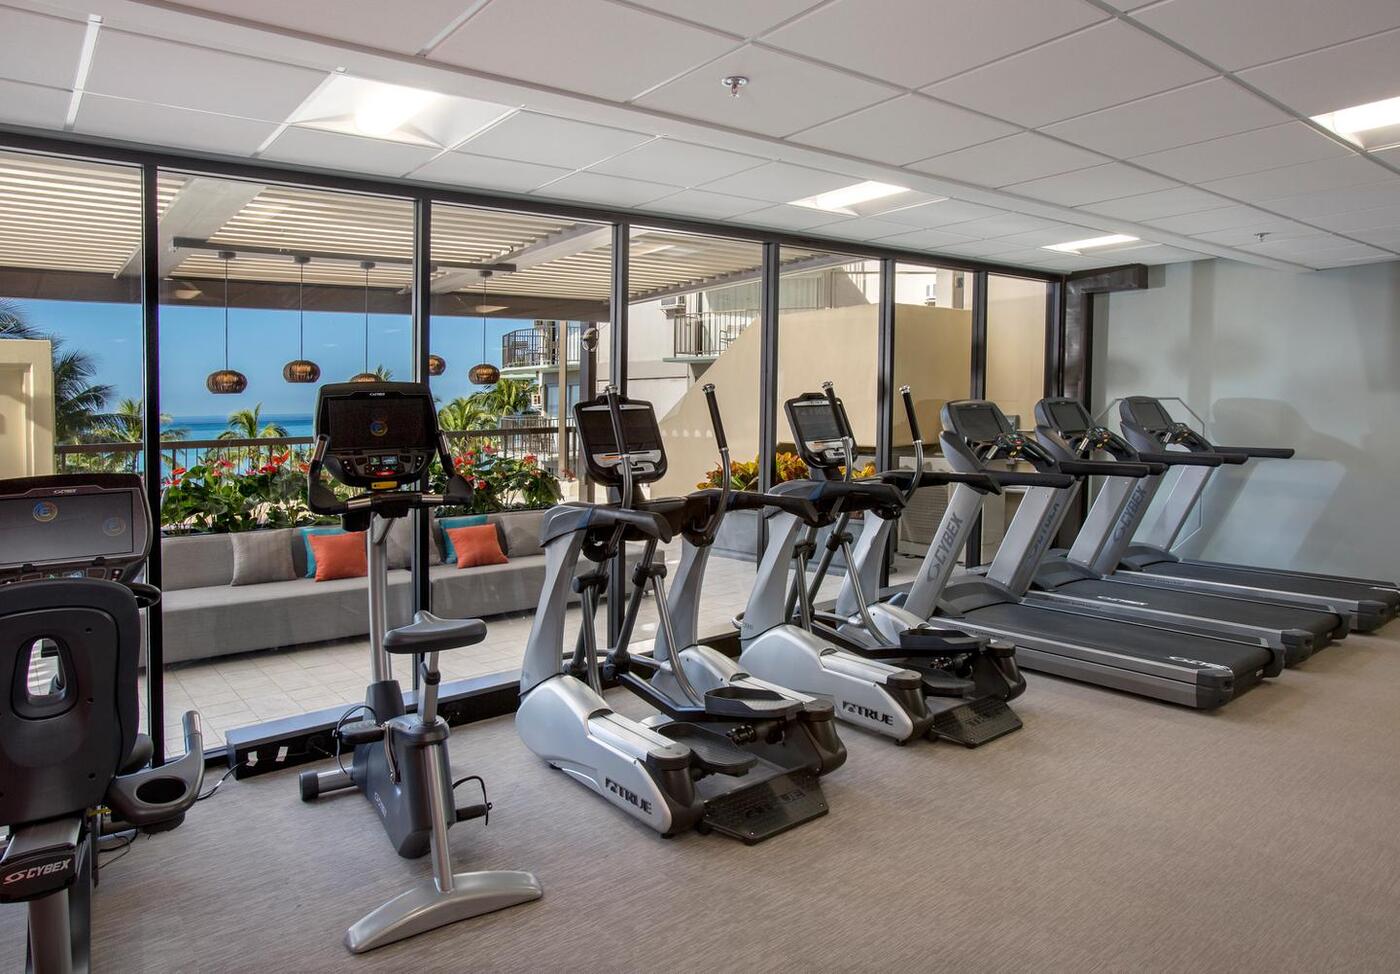 Fitness center cardio machines with large windows